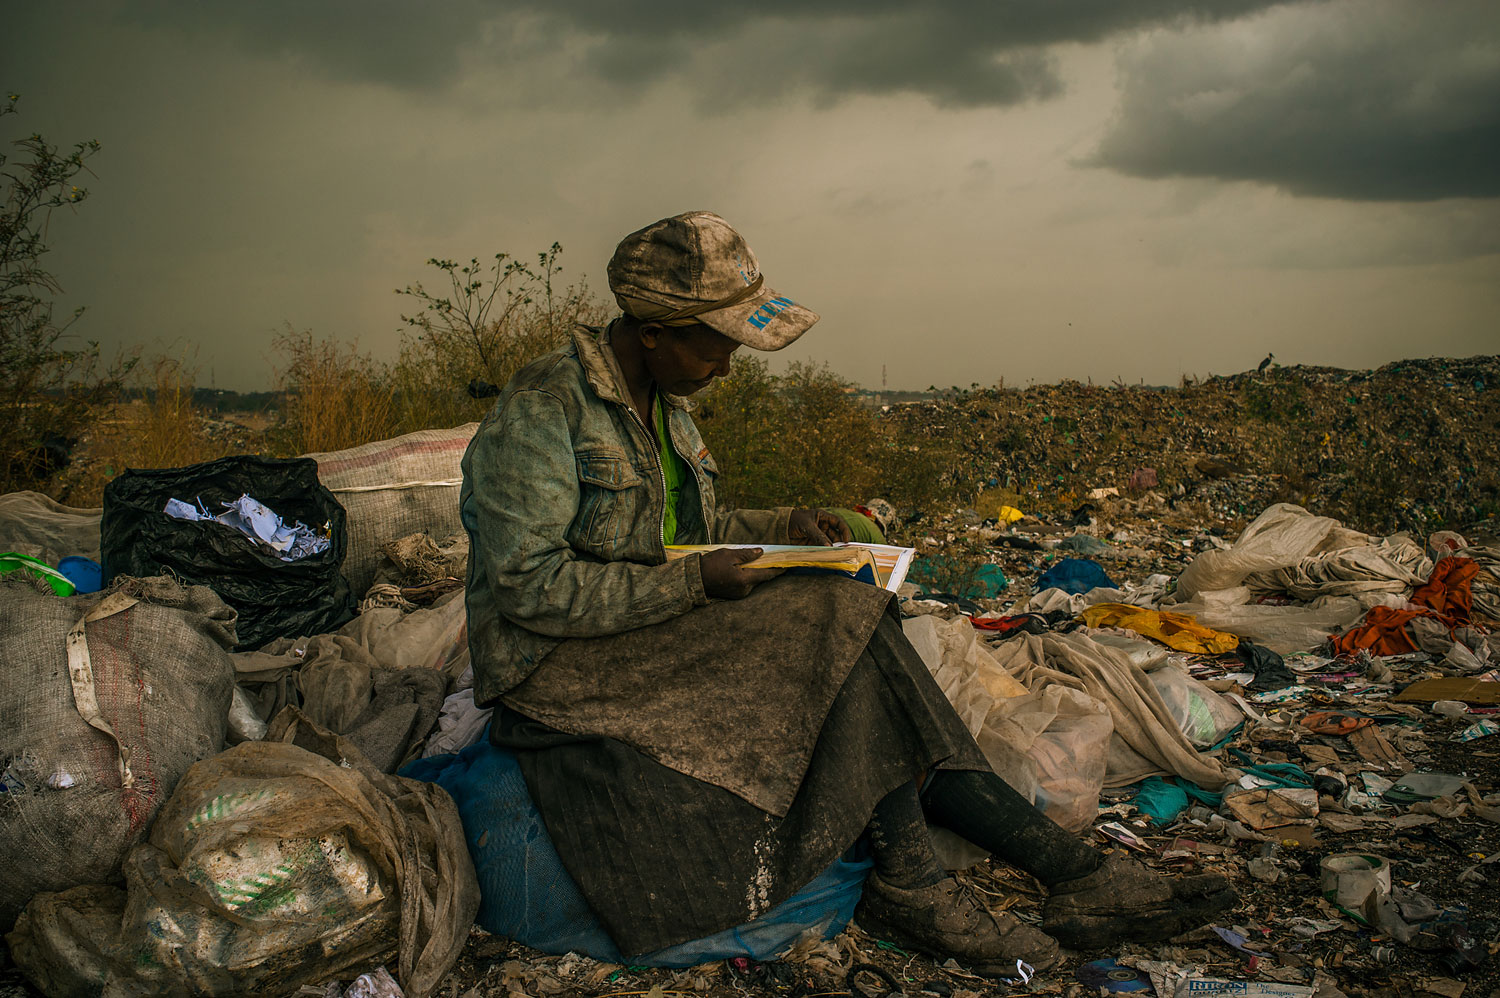 1st Prize Contemporary Issues Single. Micah Albert, USA, Redux Images. 3 April 2012, Nairobi, Kenya. Pausing in the rain, a woman working as a trash picker at the 30-acre dump, which literally spills into households of one million people living in nearby slums, wishes she had more time to look at the books she comes across. She even likes the industrial parts catalogs. “It gives me something else to do in the day besides picking [trash],” she said.